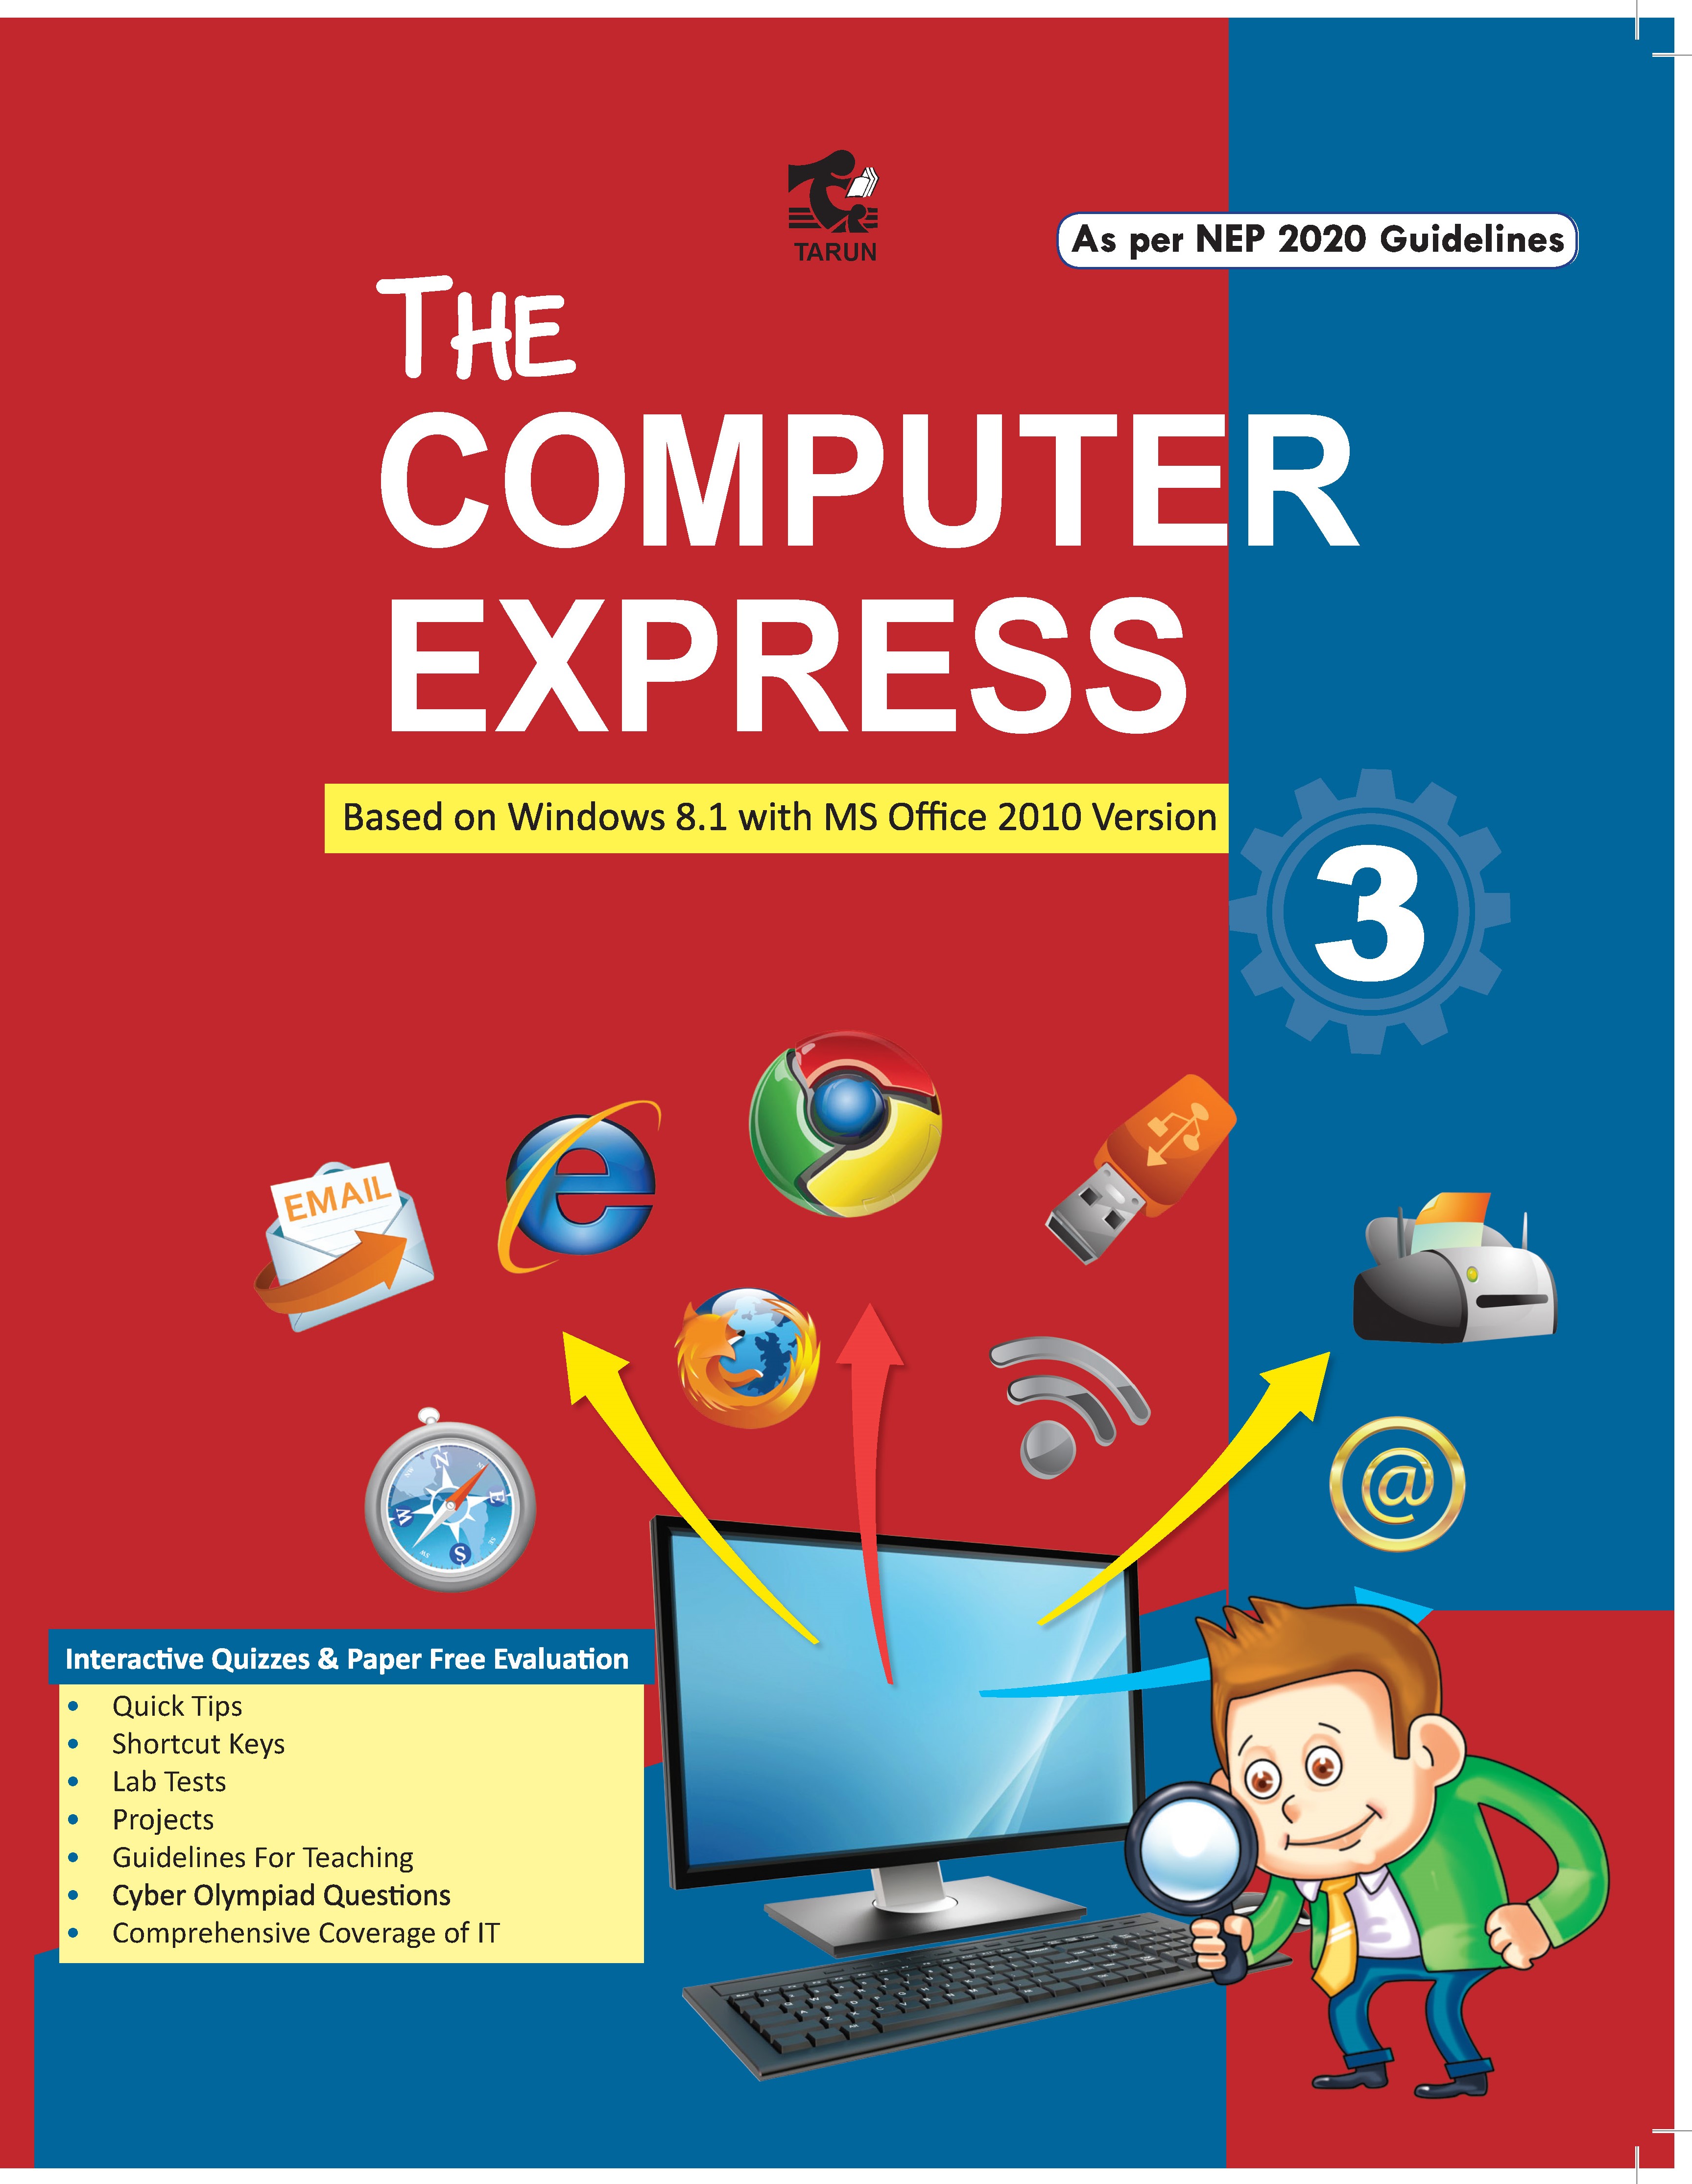 THE COMPUTER EXPRESS 3